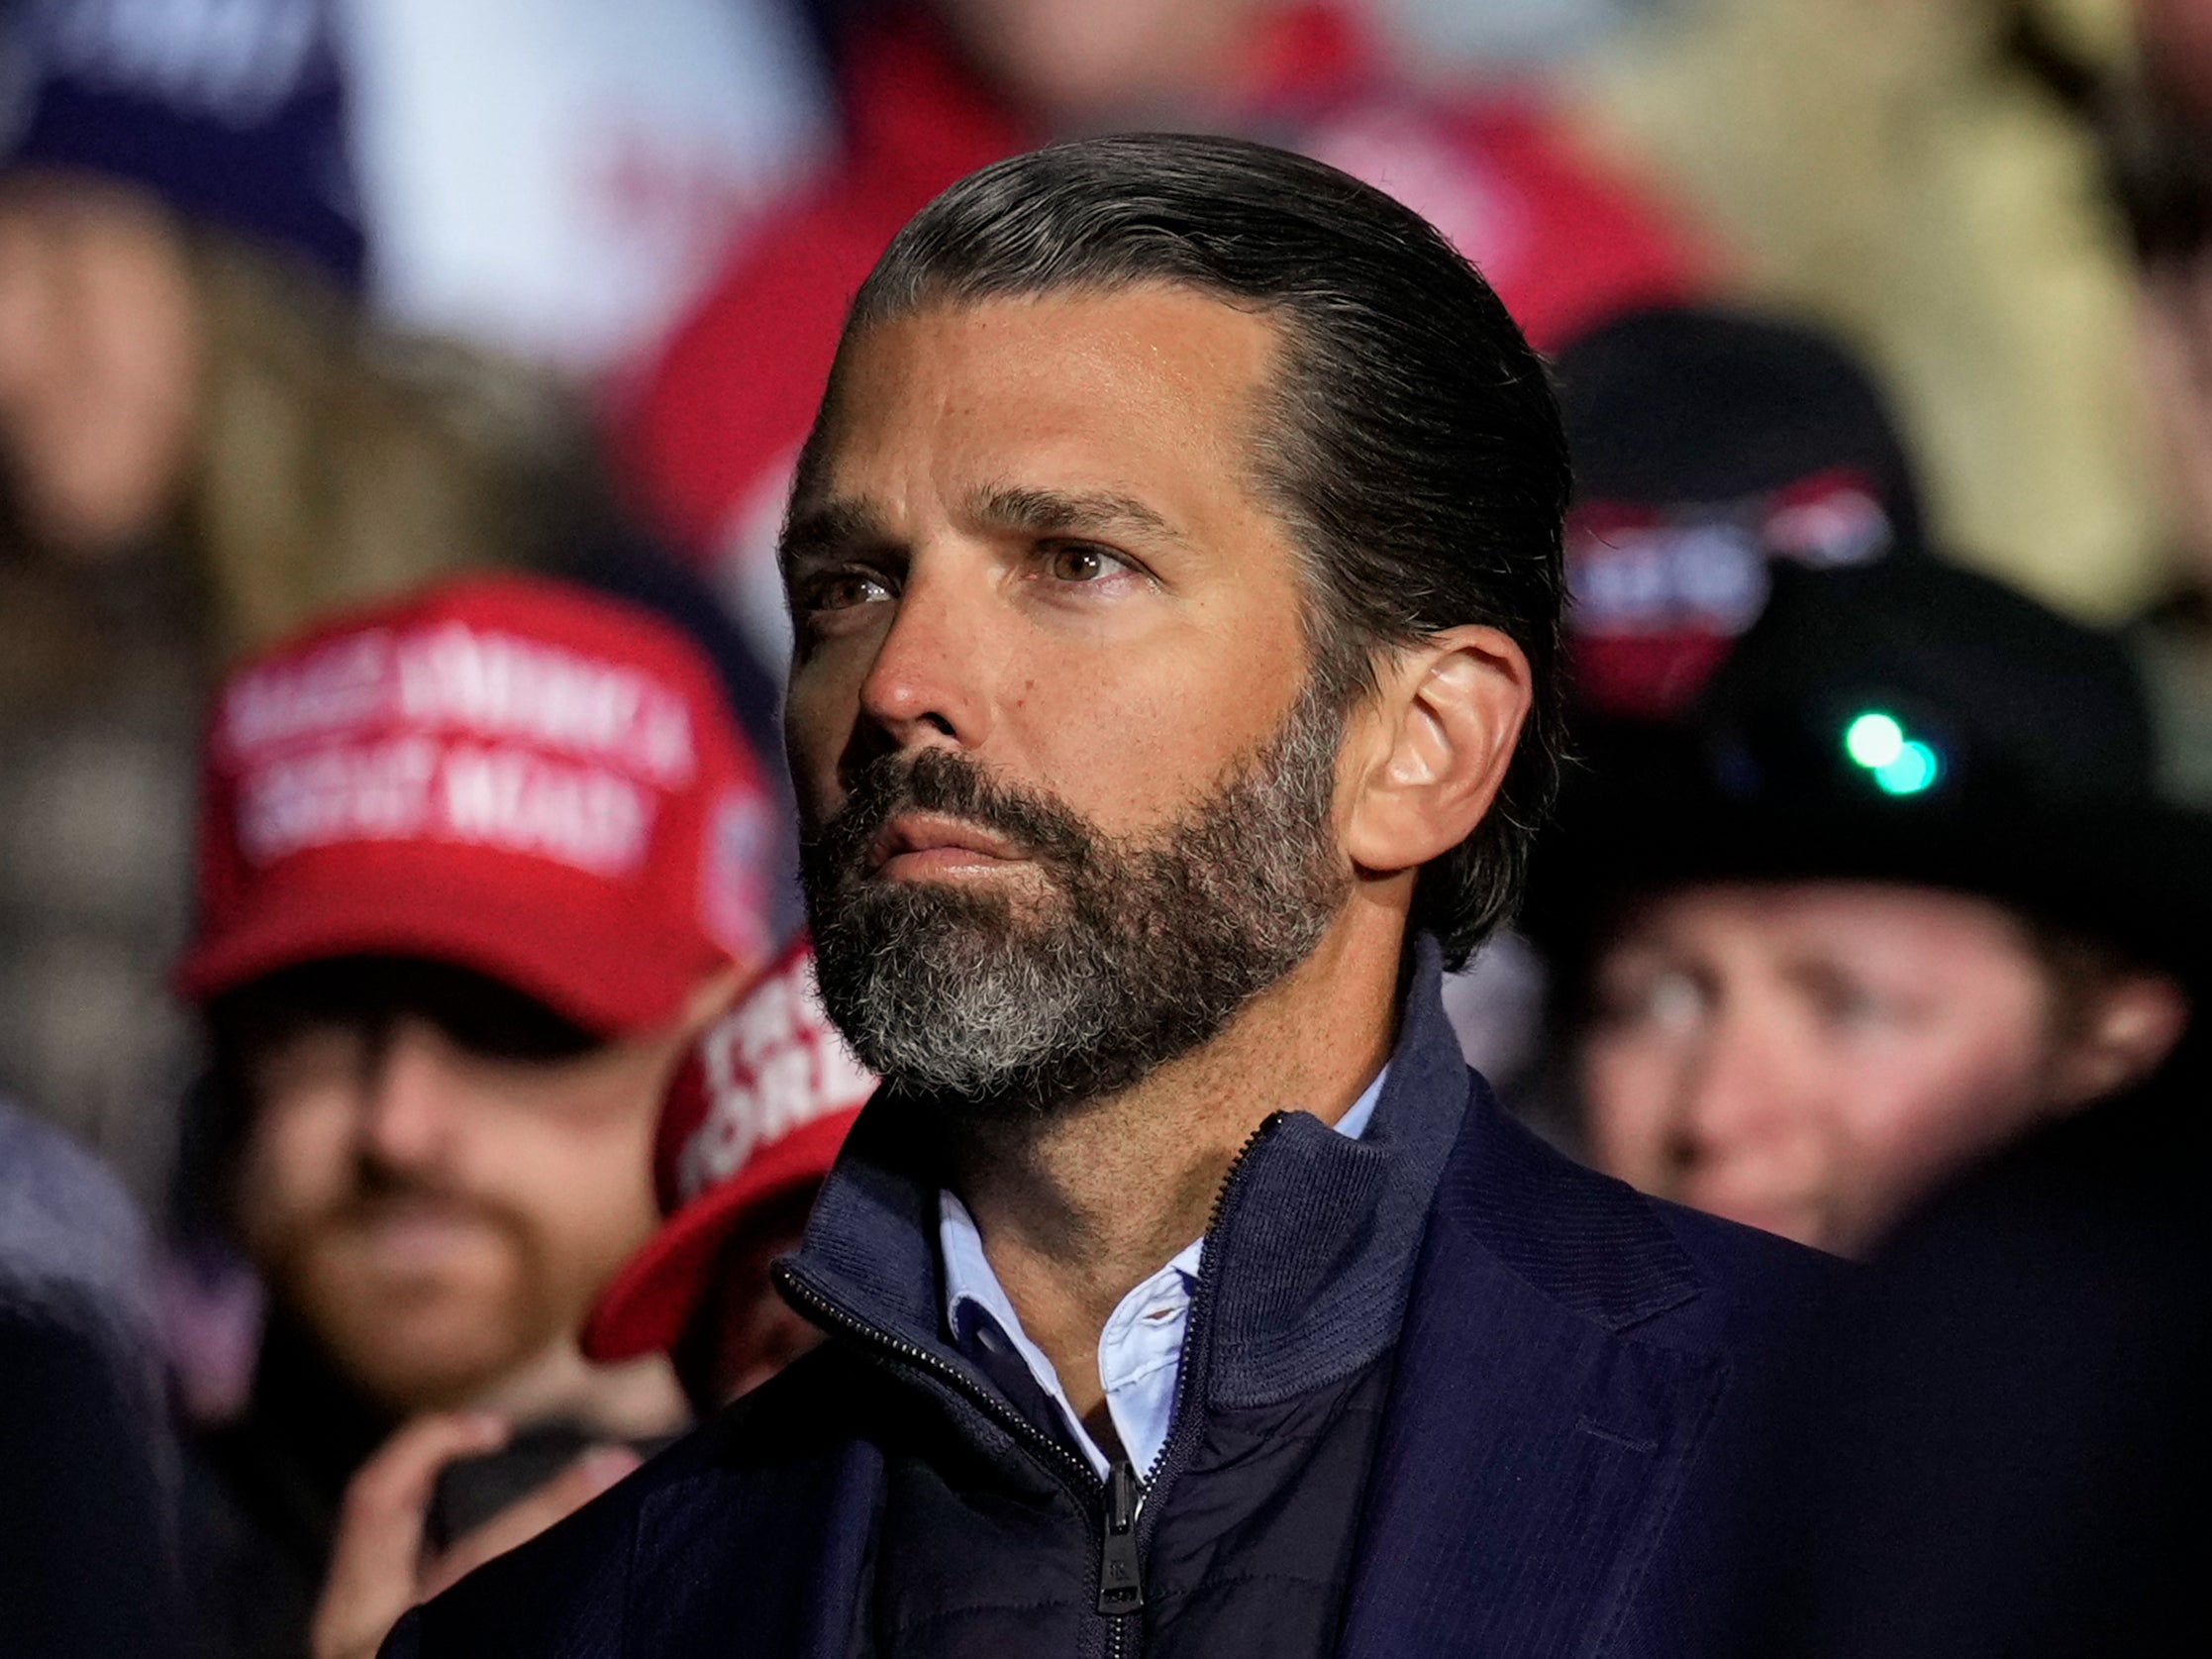 Donald Trump Jr. listens as former President Donald Trump speaks at a rally at the Dayton International Airport on November 7, 2022 in Vandalia, Ohio